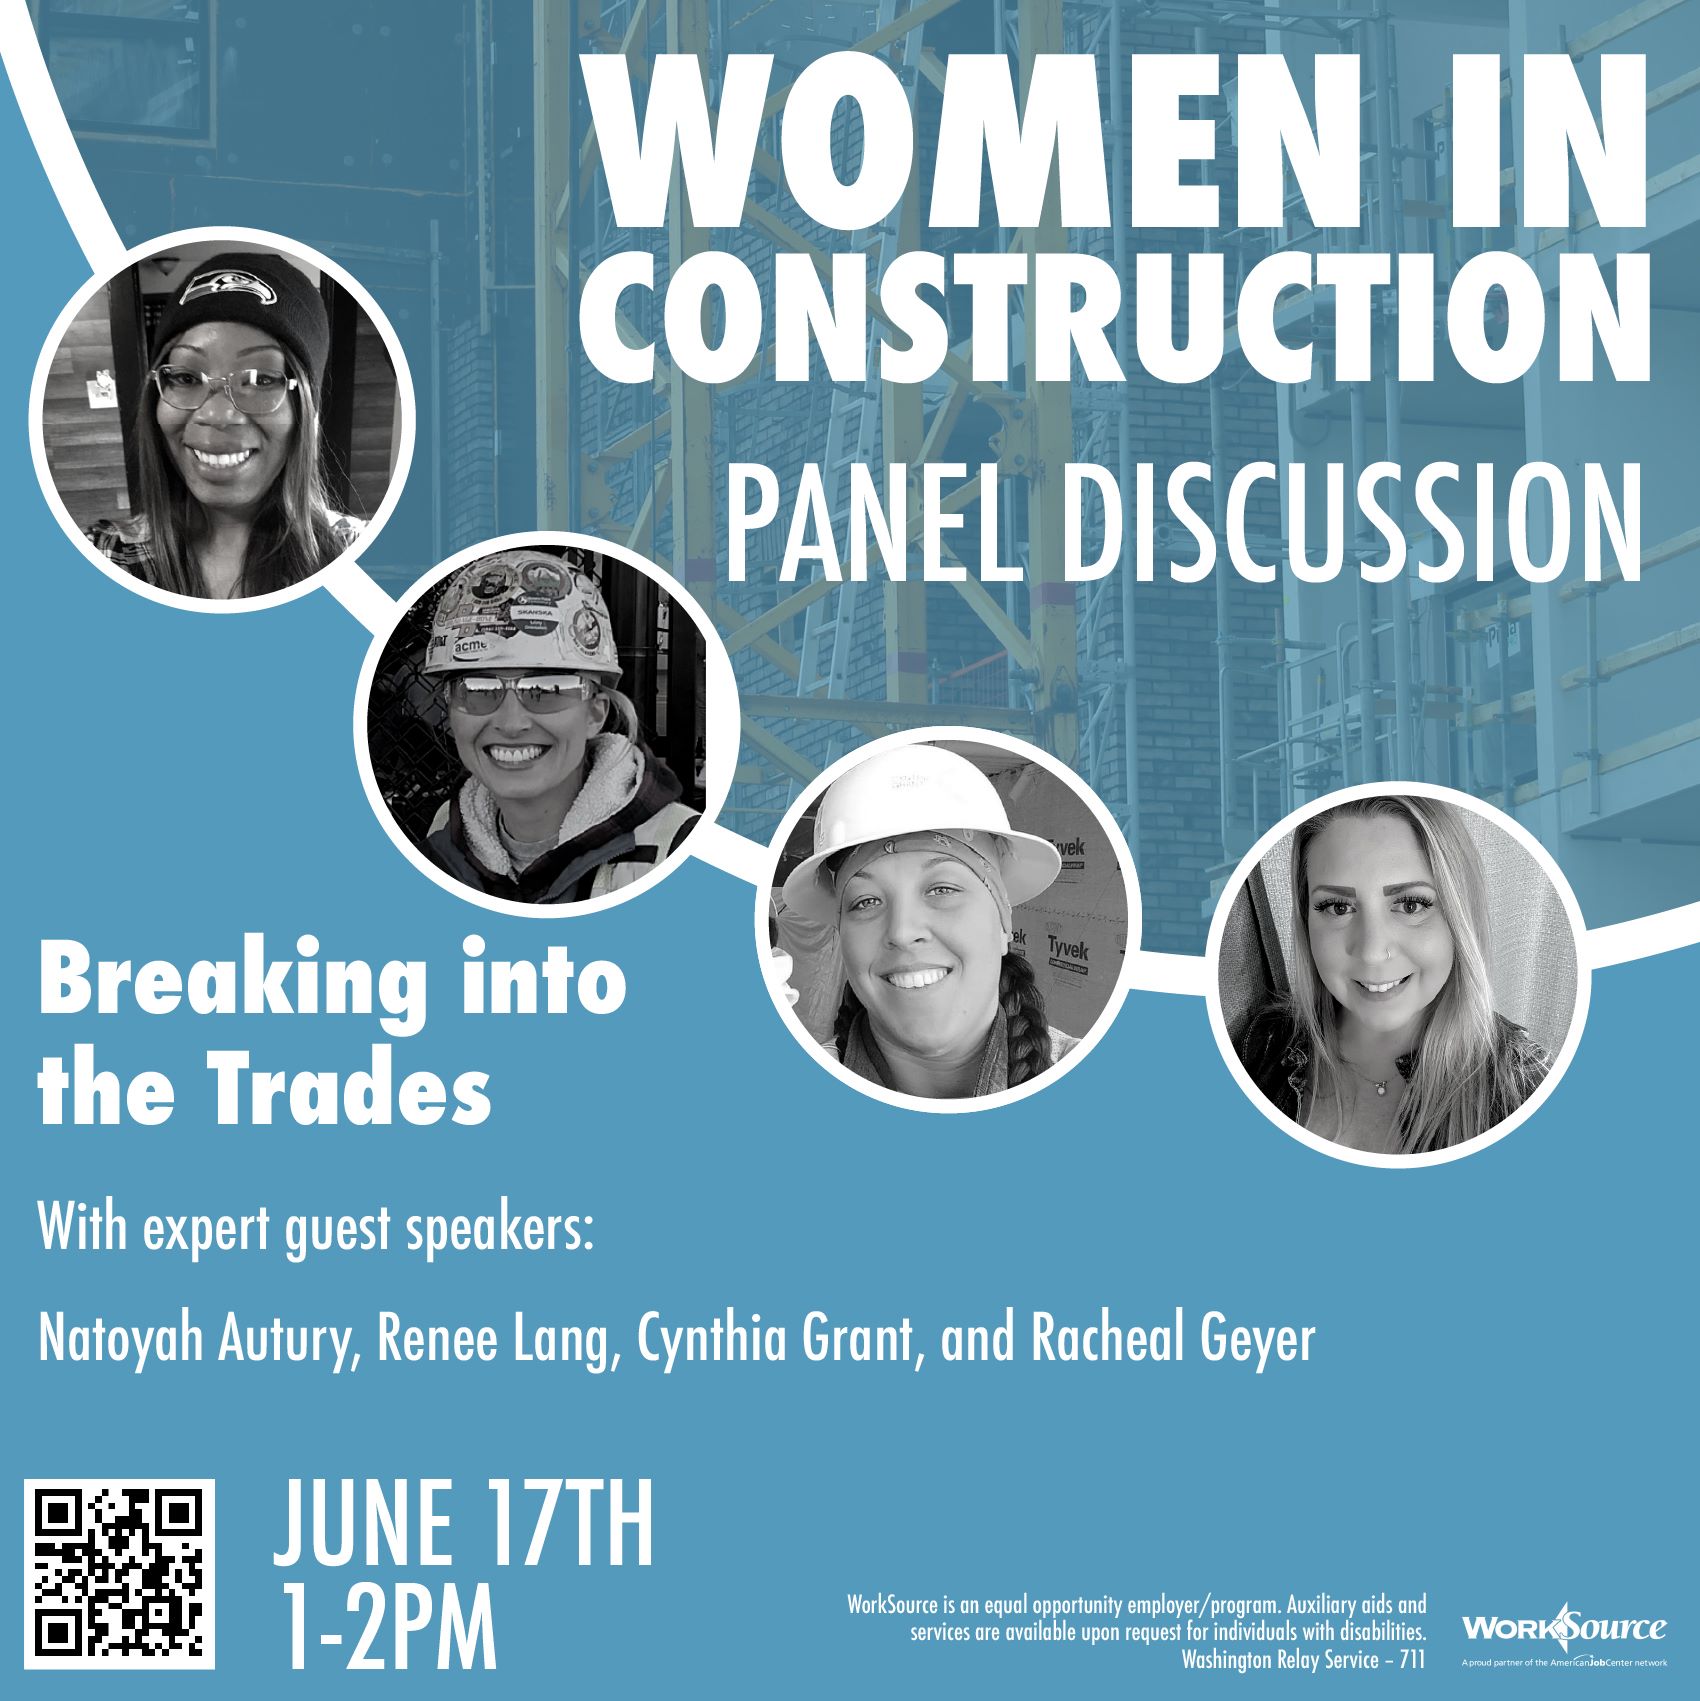 Women in Construction Panel Discussion - June 17th 1